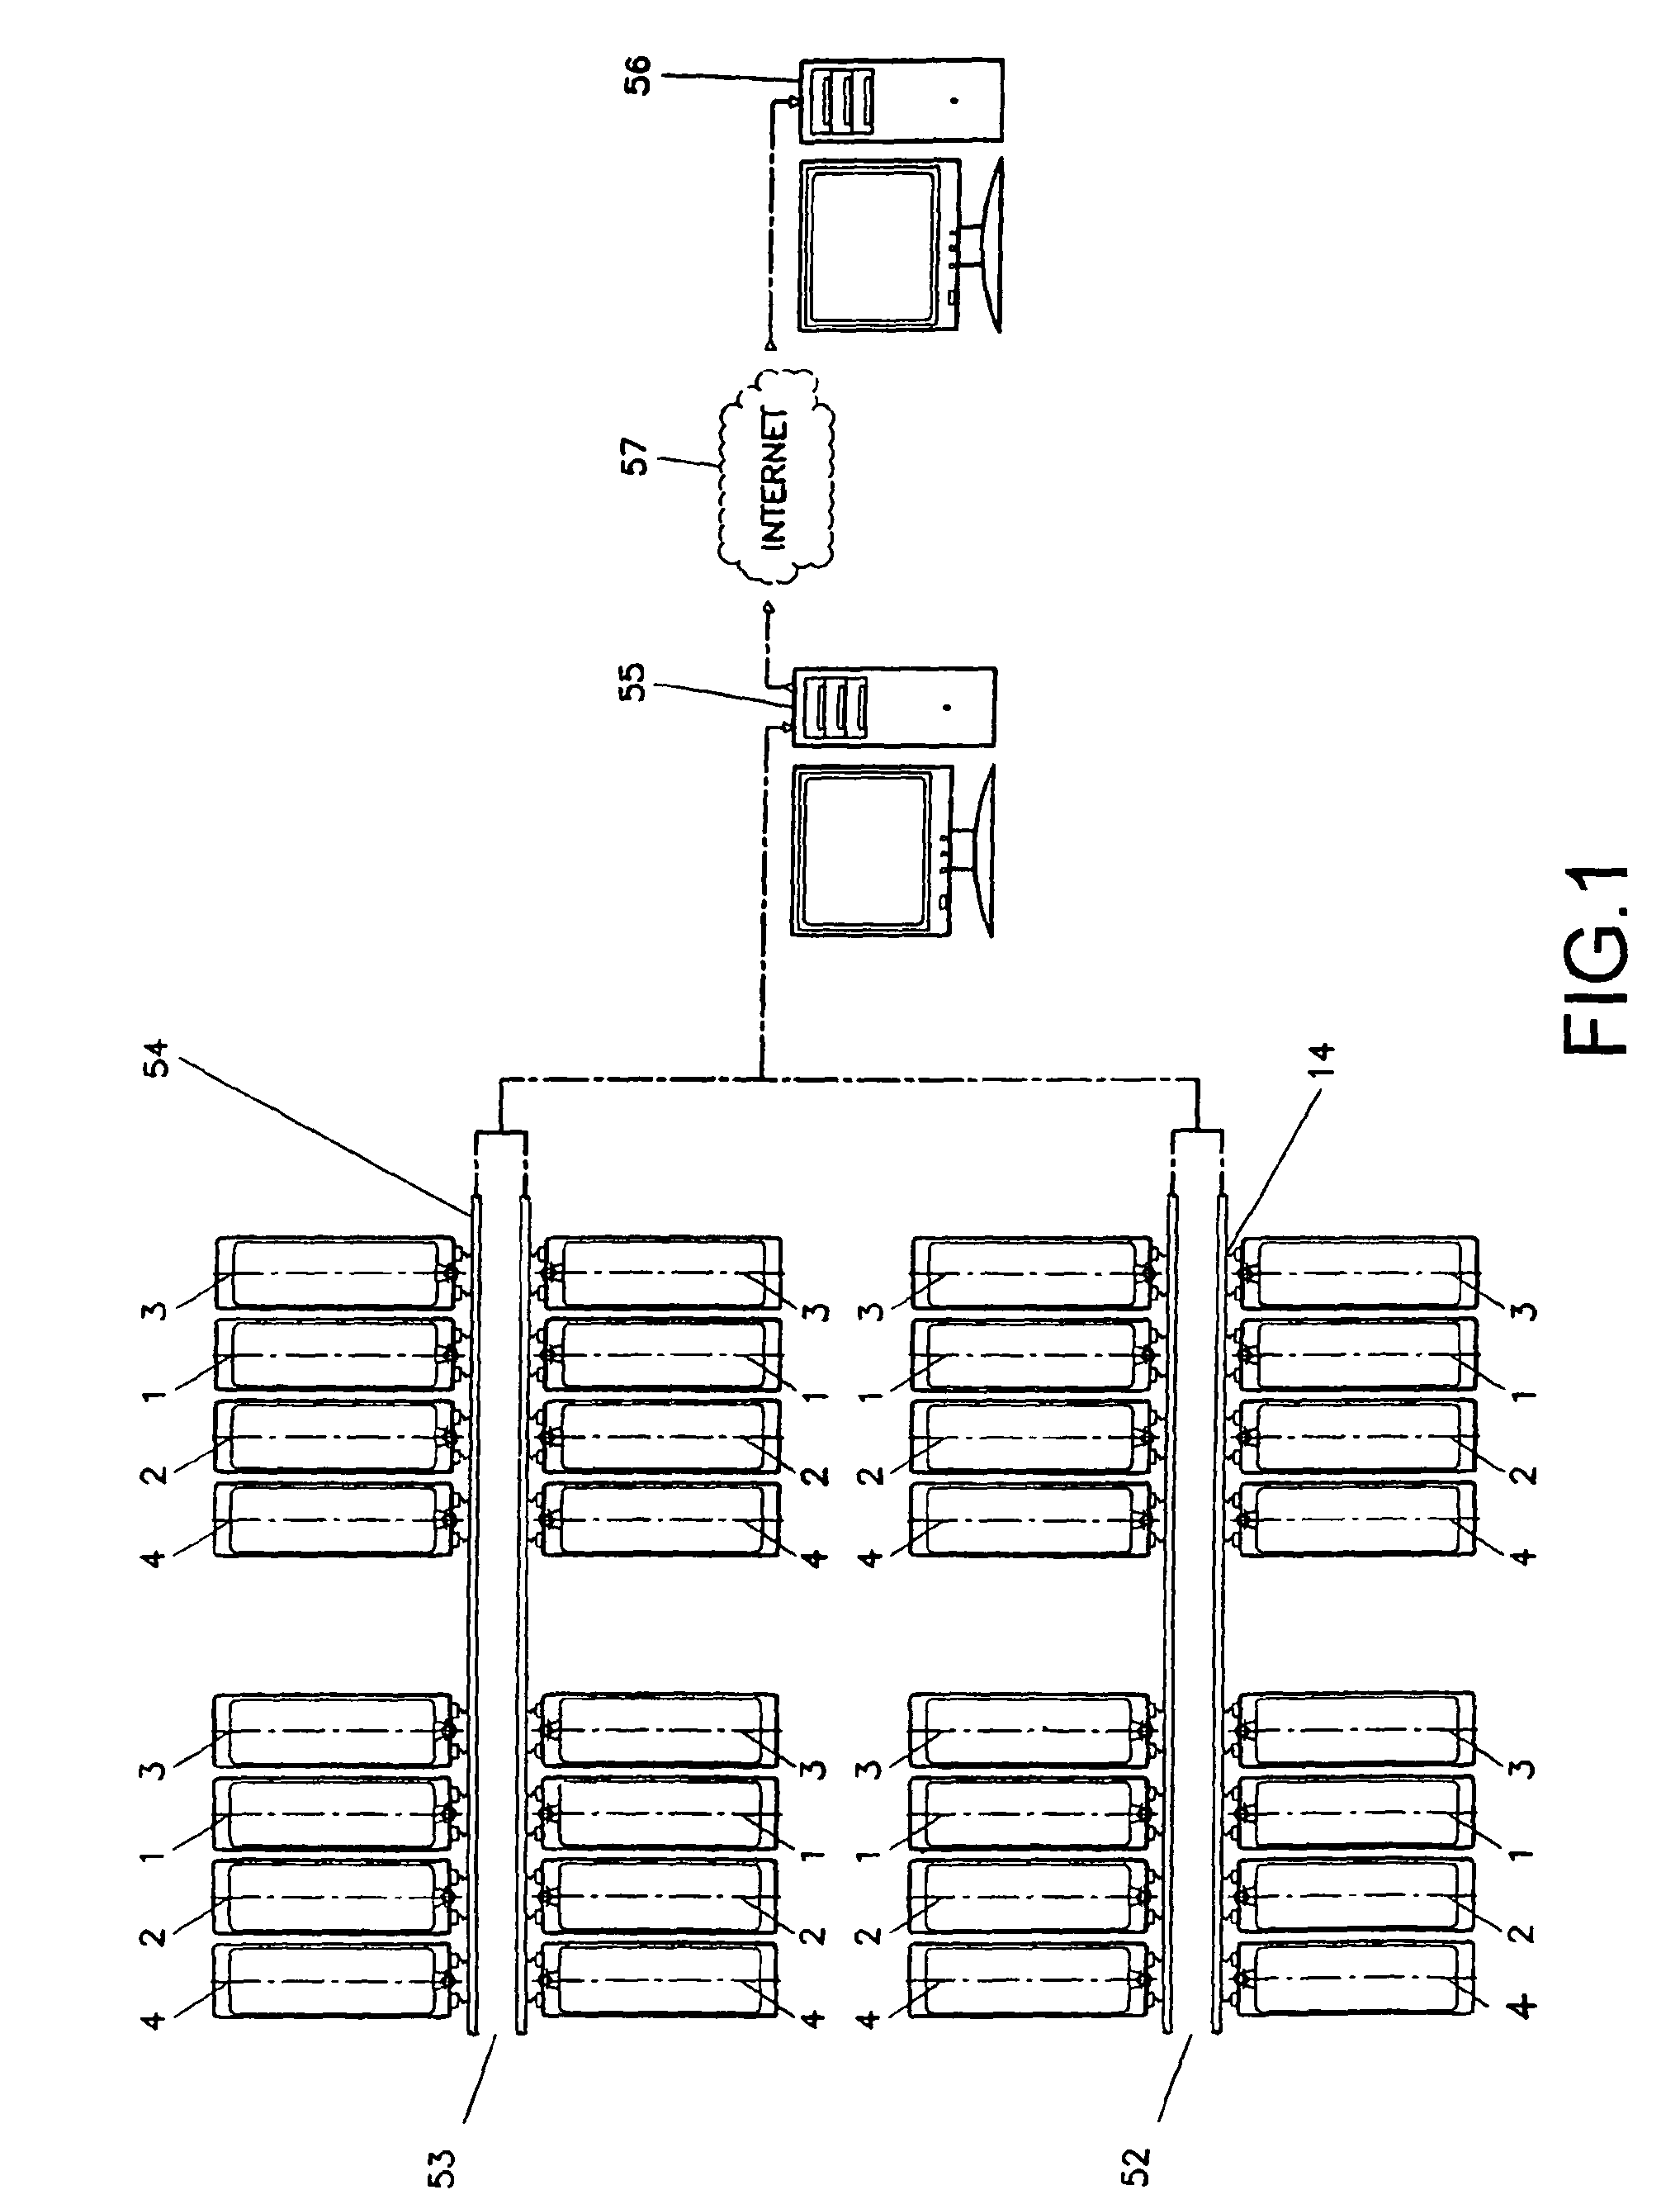 System for monitoring, control, and management of a plant where hydrometallurgical electrowinning and electrorefining processes for non ferrous metals